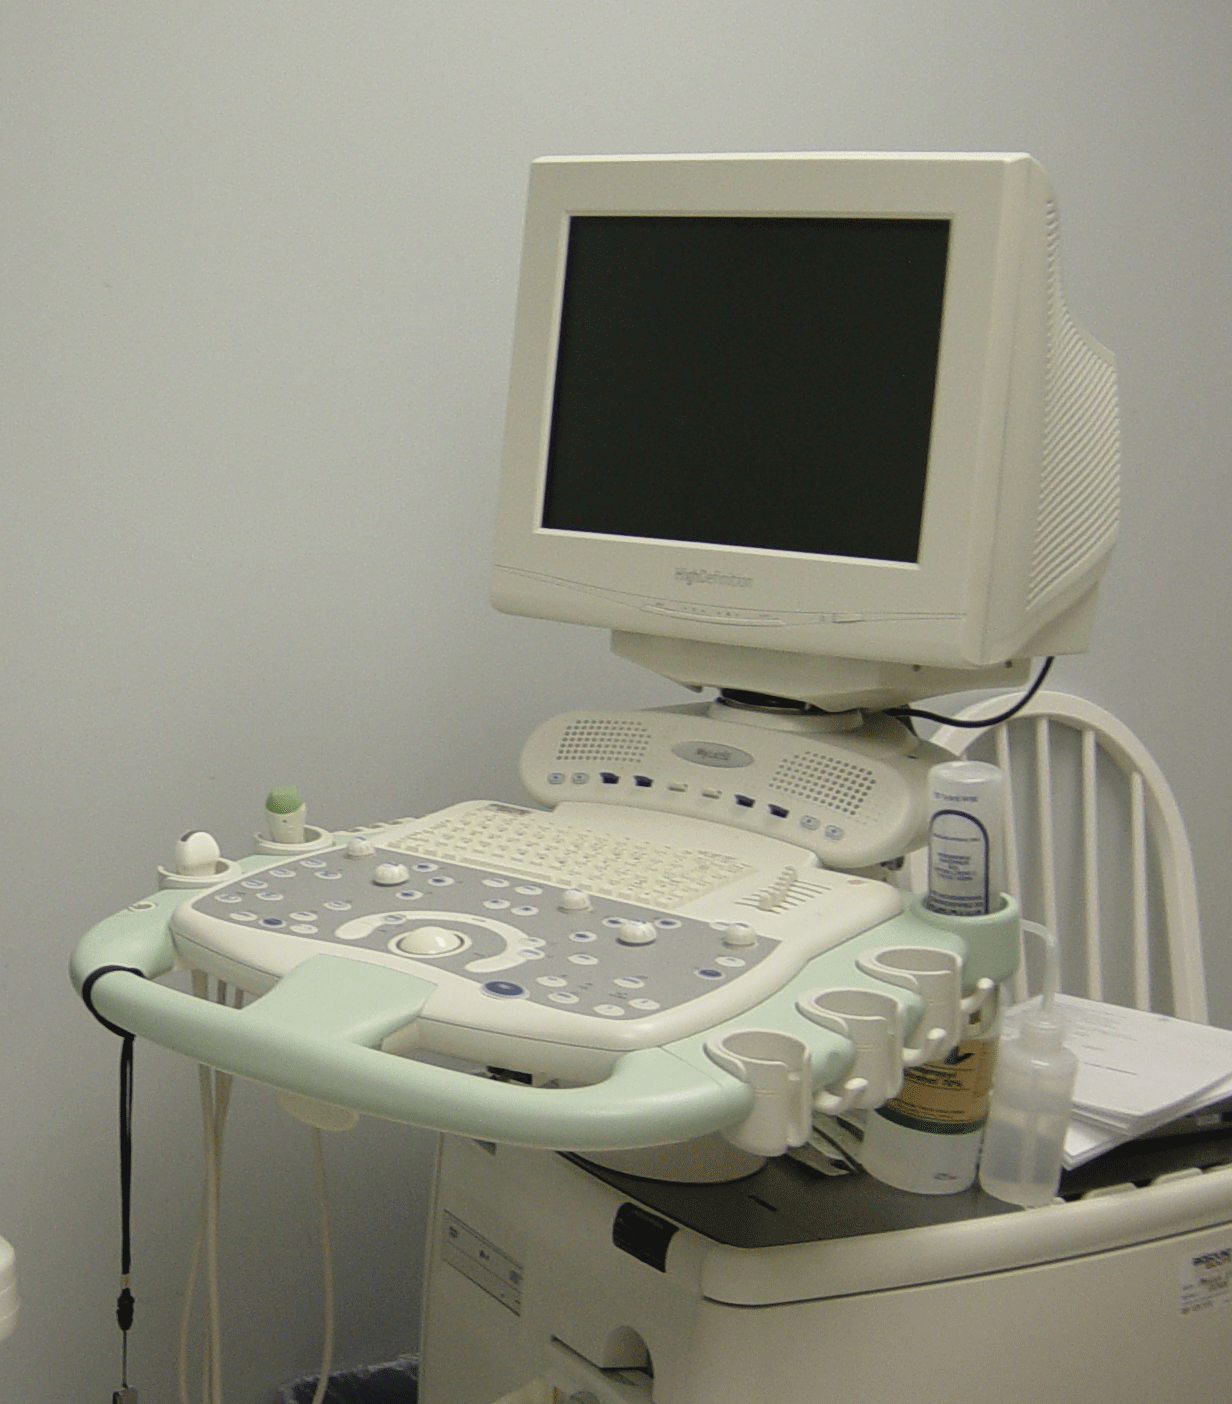 Our ultrasound